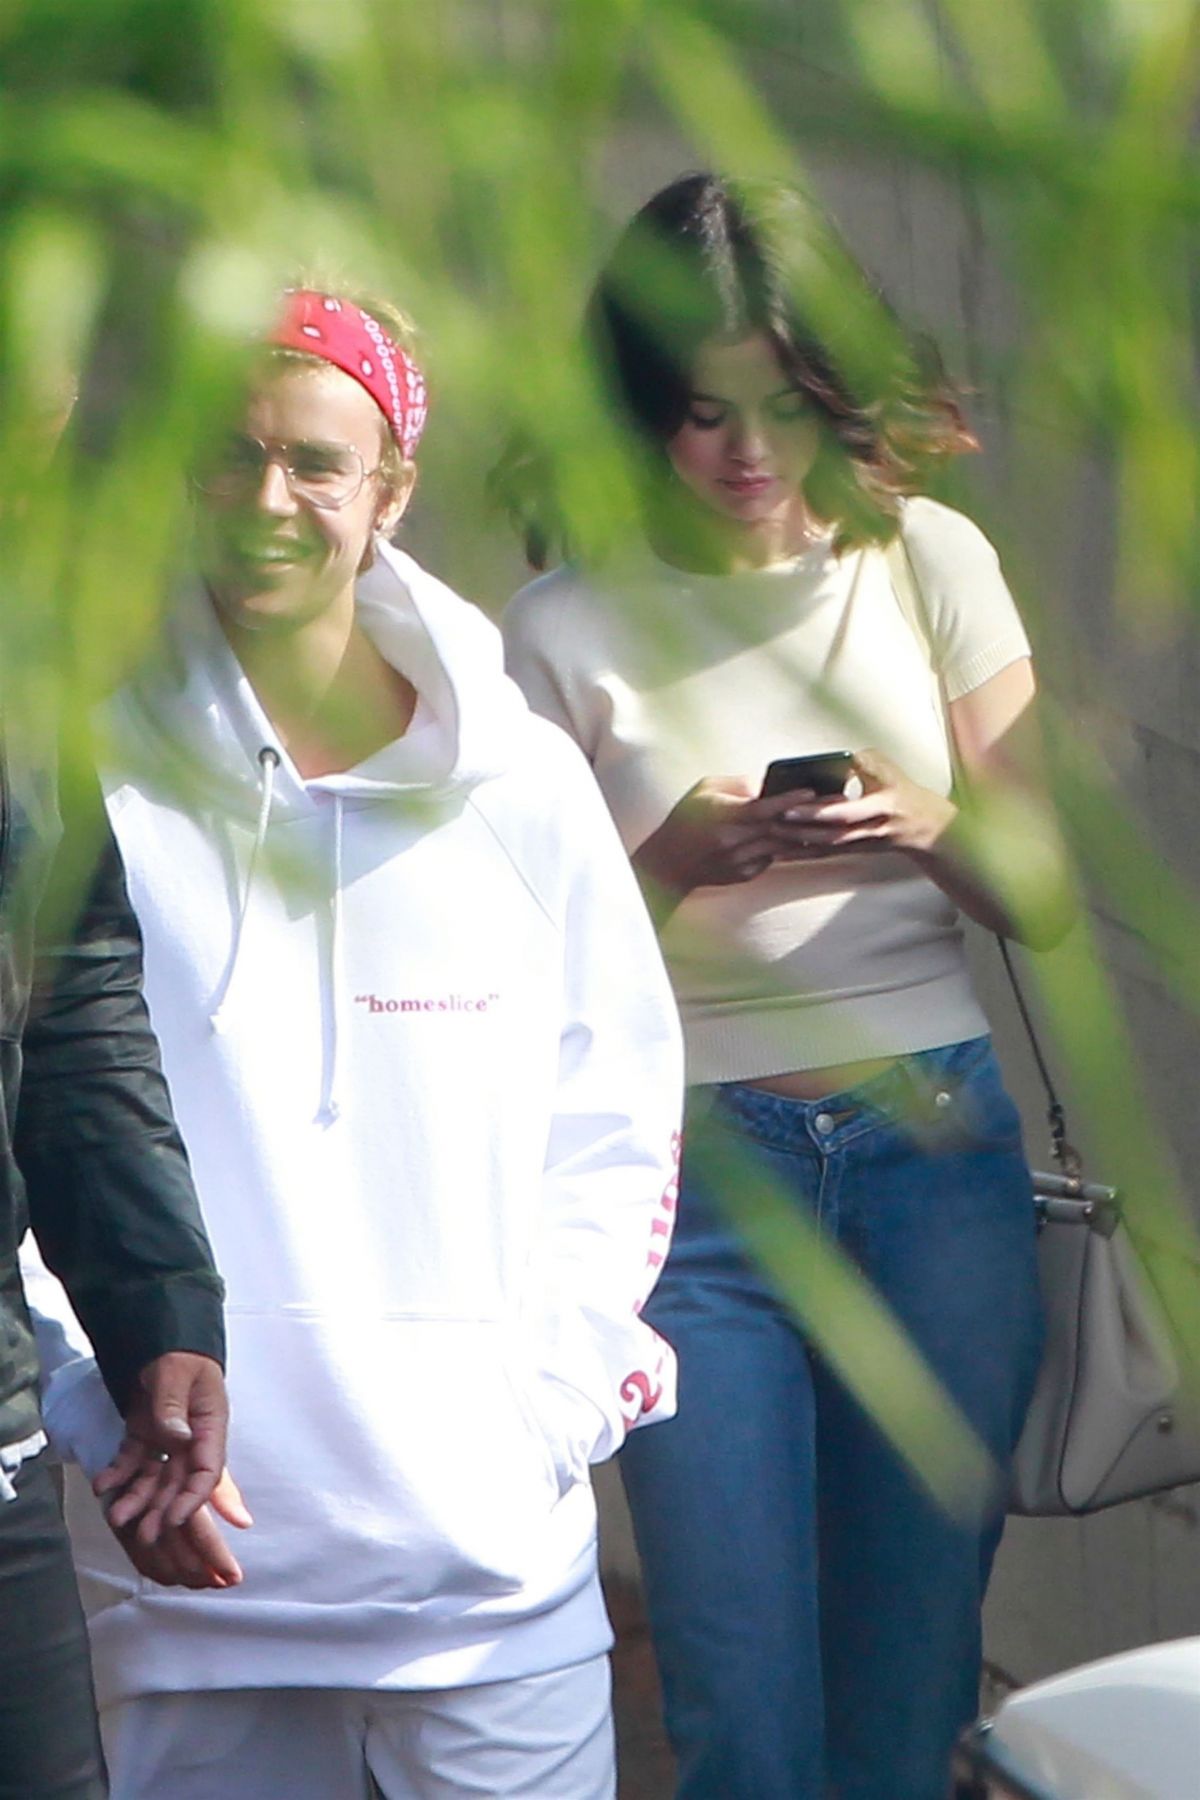 SELENA GOMEZ and Justin Bieber at a Church Services in Los